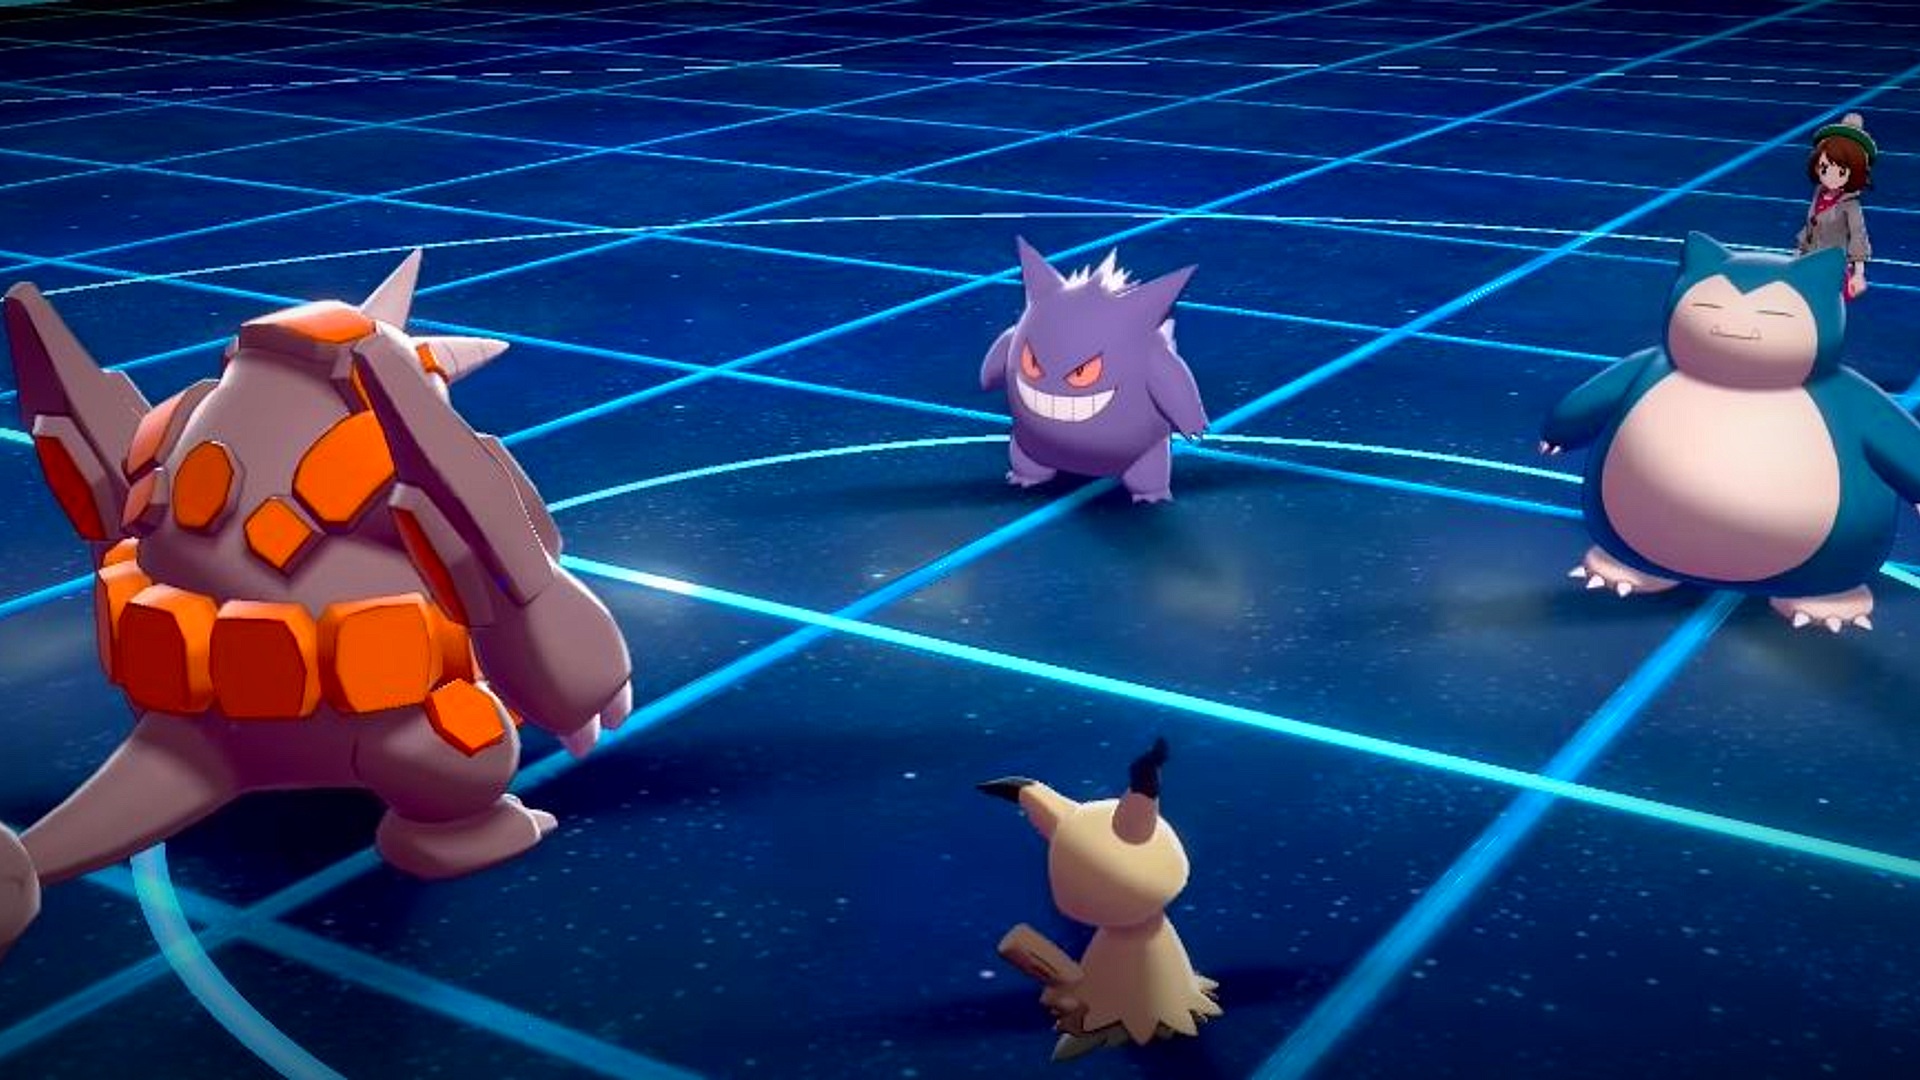 Ranked Battles Series 6—Featuring Pokémon Sword and Pokémon Shield—Is Here!